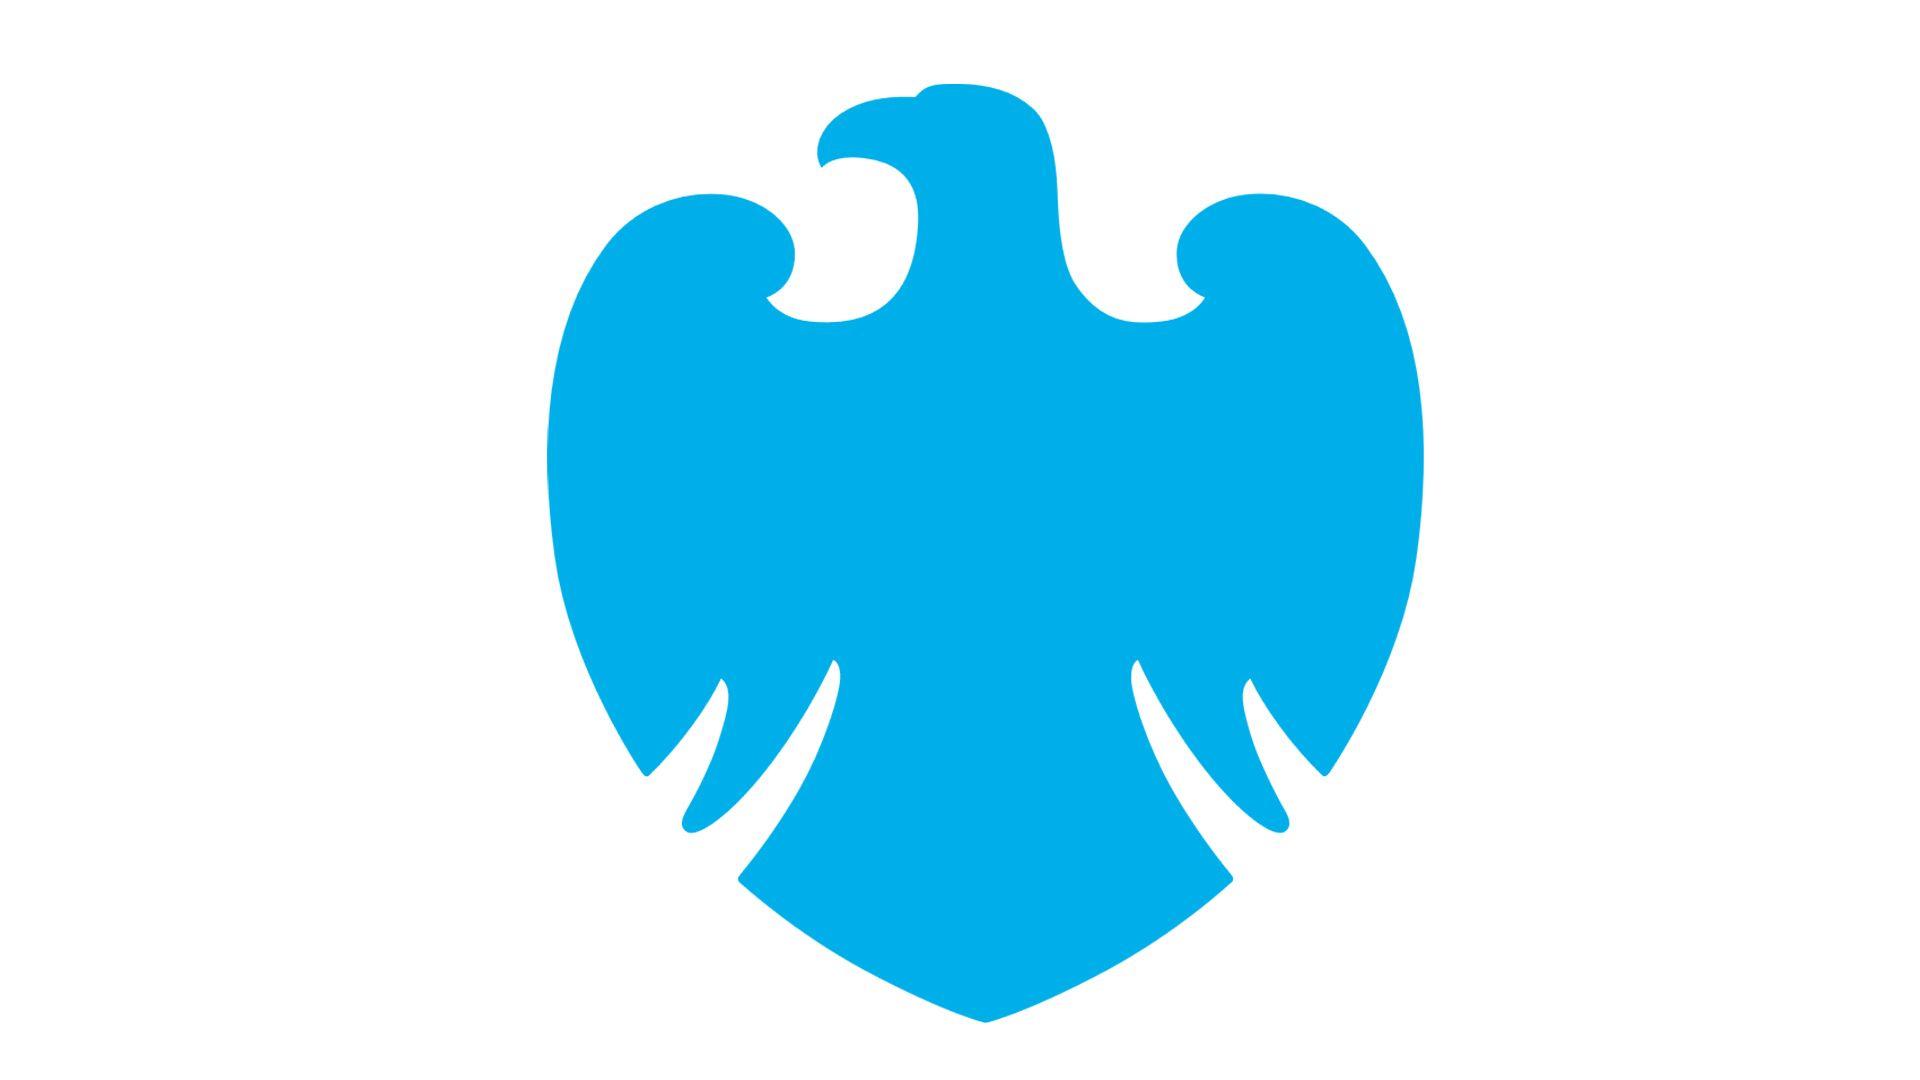 Barclays Logo - Barclays Logo, Barclays Symbol Meaning, History and Evolution